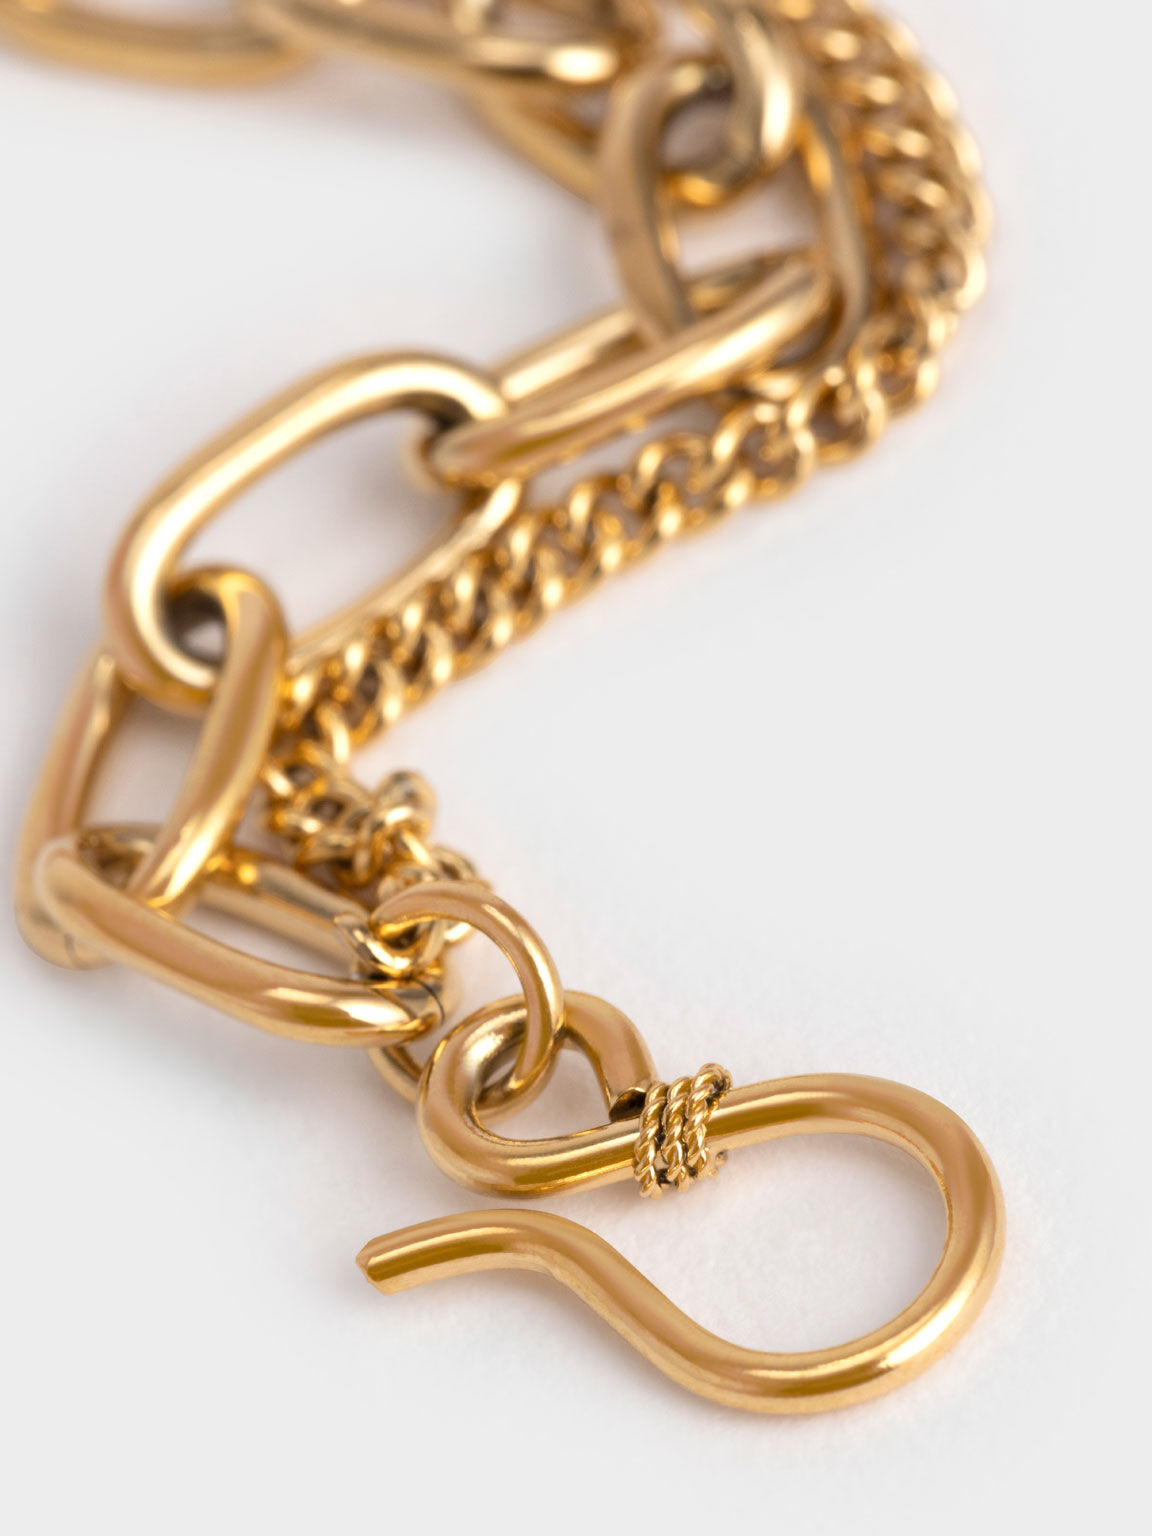 Double Chain Necklace, Gold, hi-res